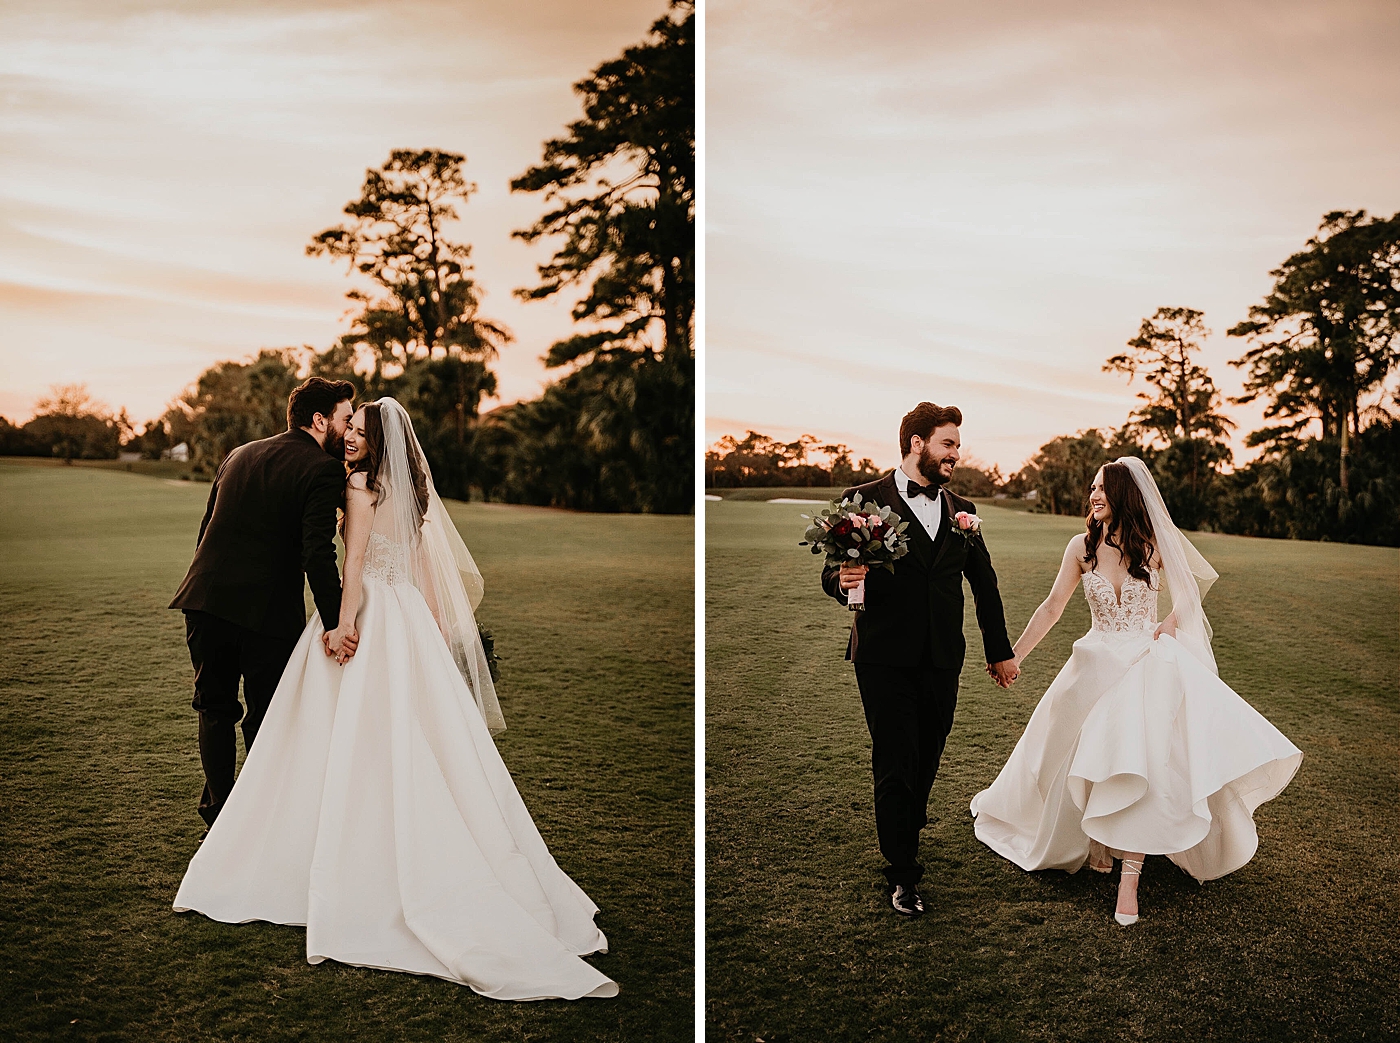 Groom kissing Bride on her cheek with backs turned and walking together on golf course fairway with Groom holding Bride's Bouquet sunset Romantic Winter Wedding captured NYC Wedding Planner Poppy and Lynn